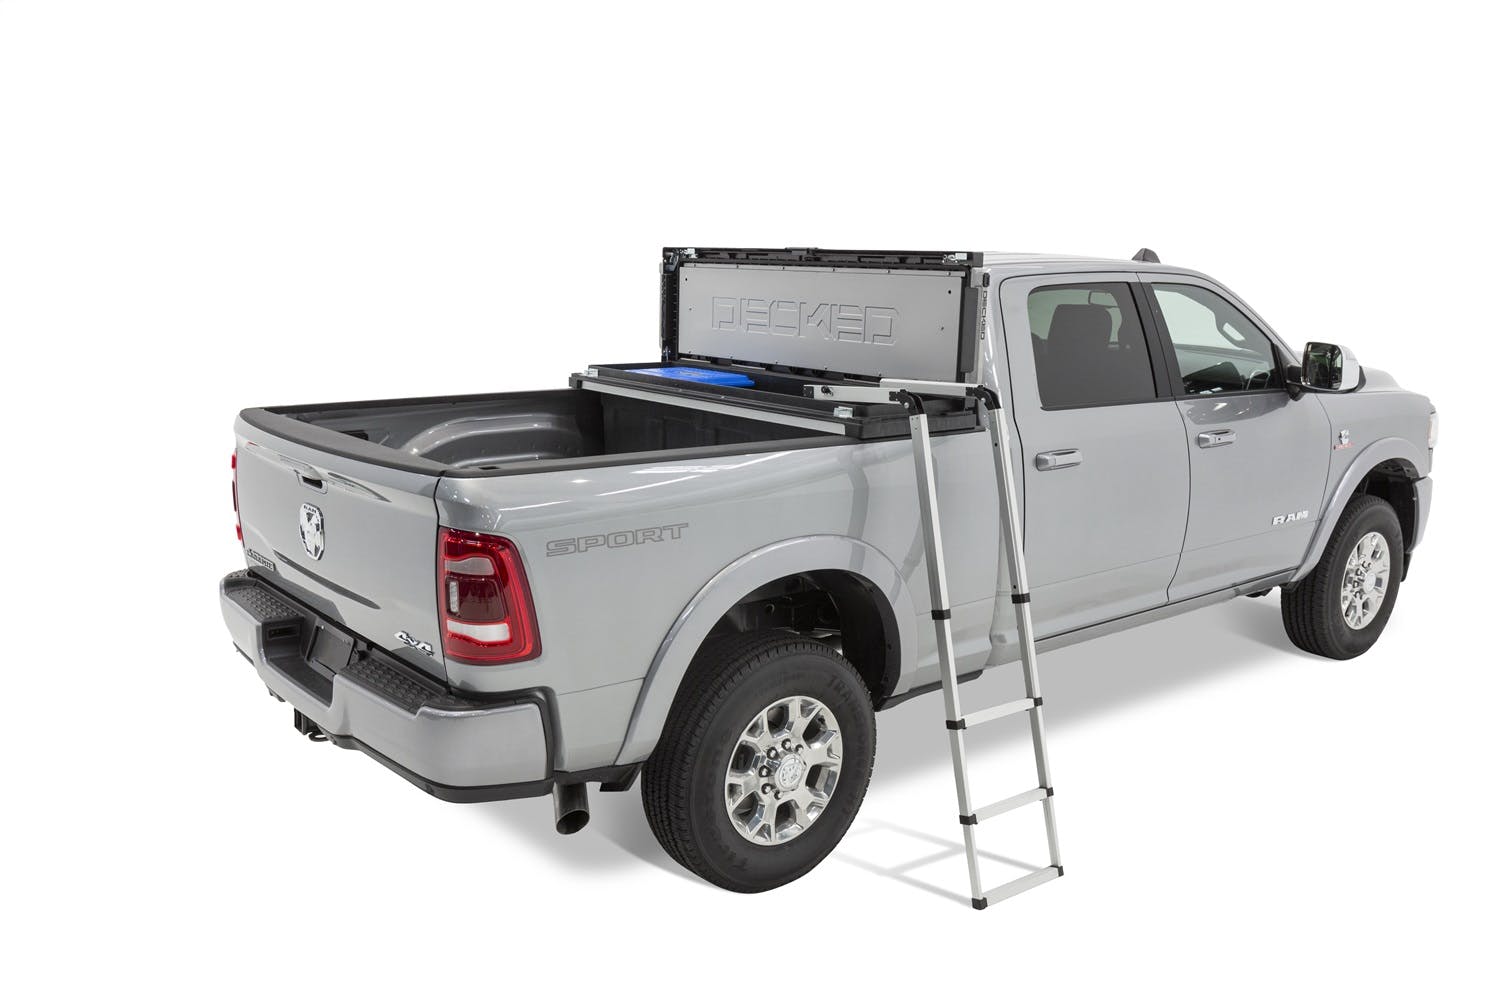 DECKED TBFDL Full-size Pickup Truck Tool Box Deep Tub with ladder